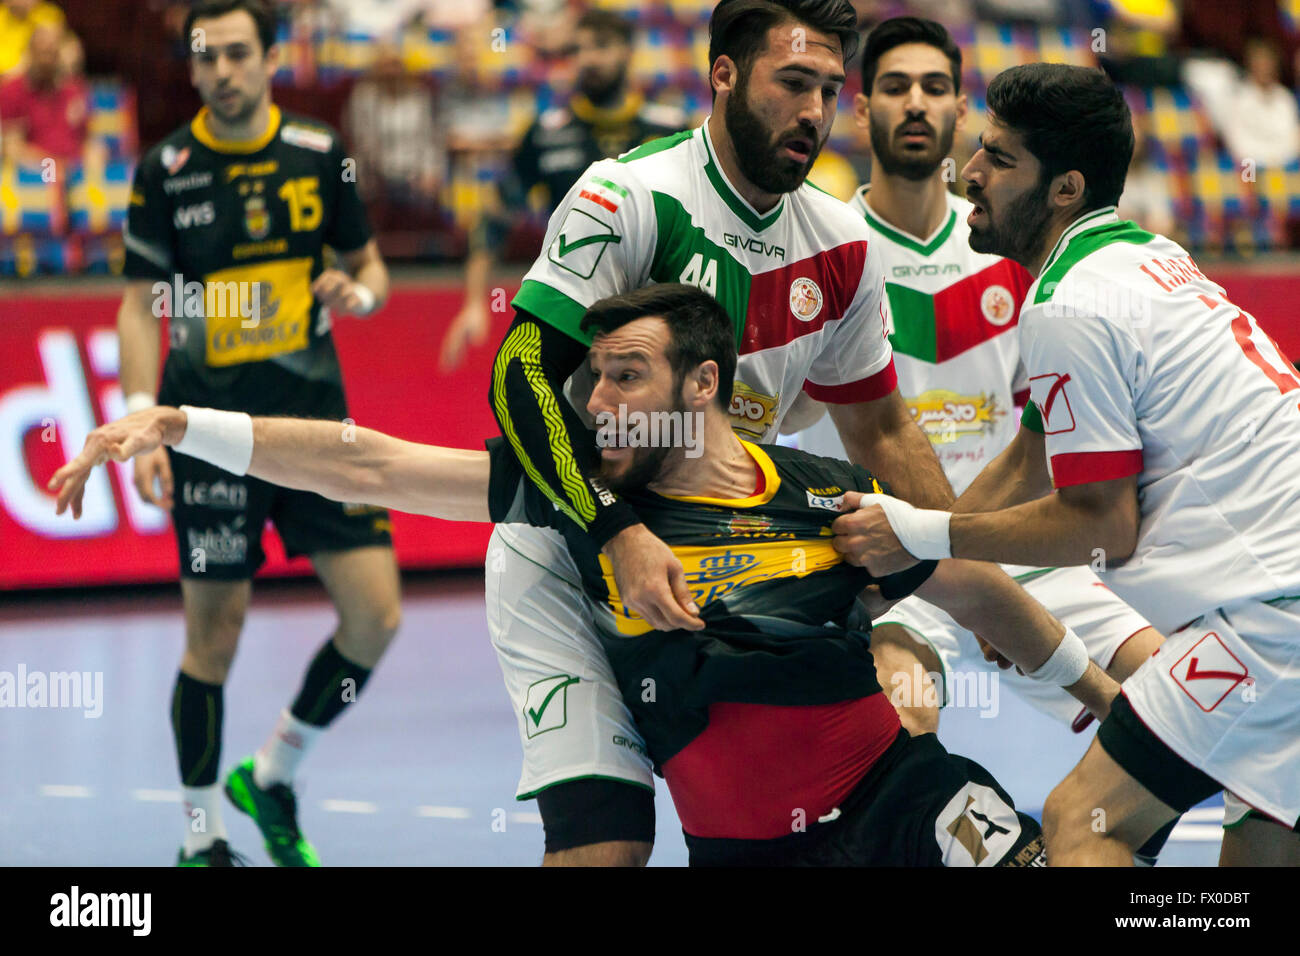 Malmö, Sweden, April 9th, 2016. Gedeón Guardiola (30) of Spain in action during the IHF 2016 Men’s Olympic Qualification Tournament between Spain and Iran in Malmö Arena. Stock Photo